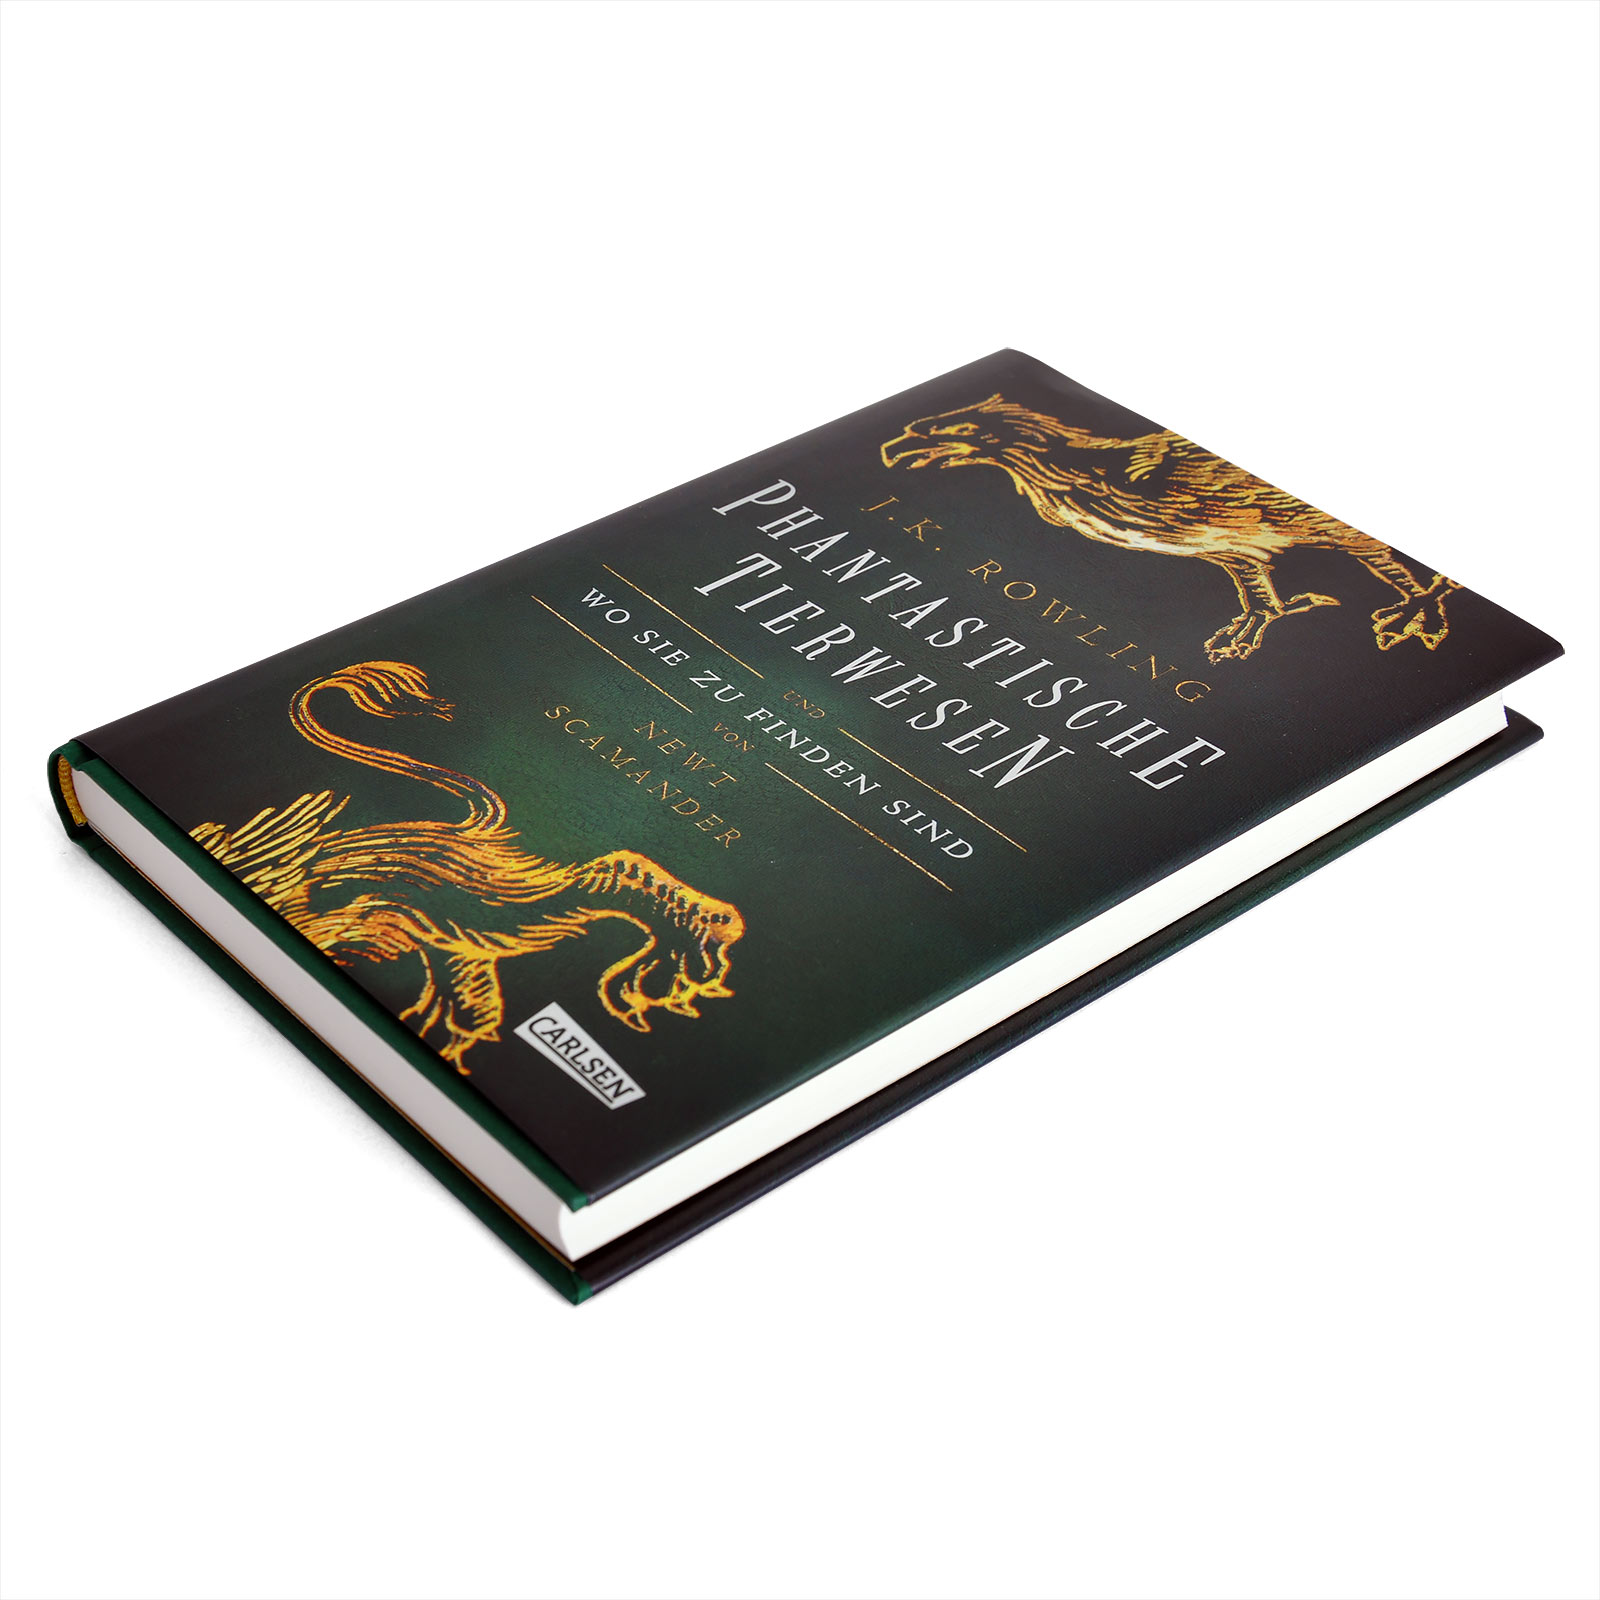 Fantastic Beasts and Where to Find Them - Hardcover